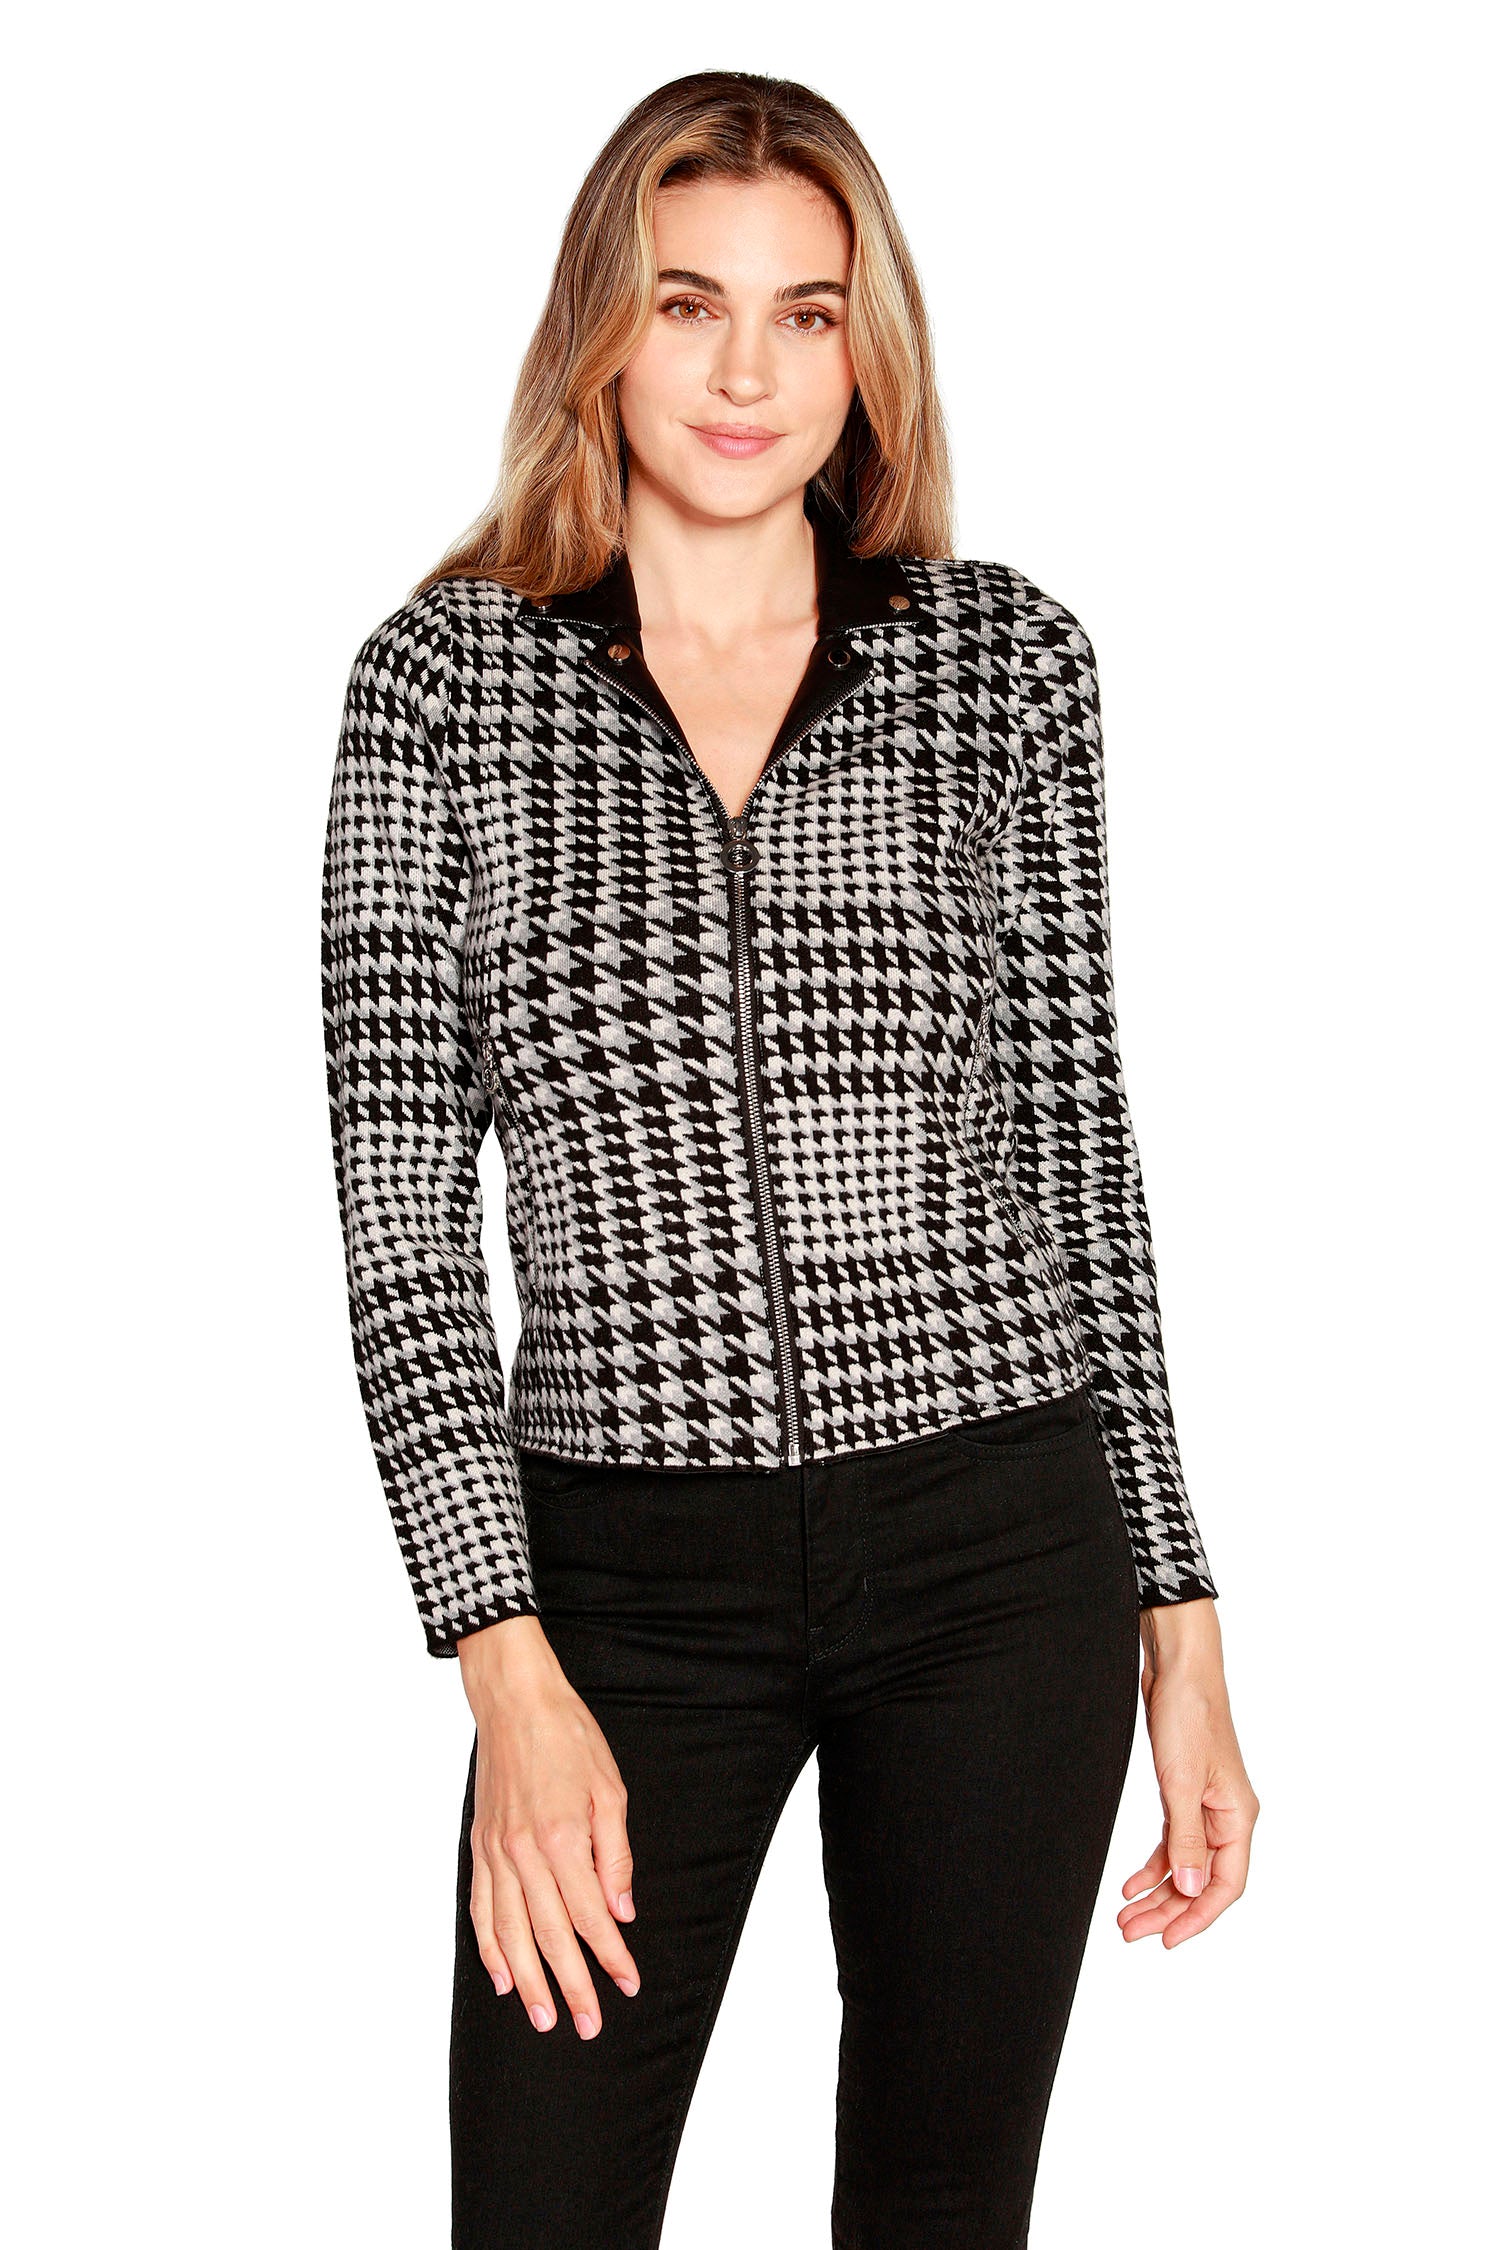 Women's Houndstooth Plaid Moto Style Jacket with Pockets and Custom Hardware